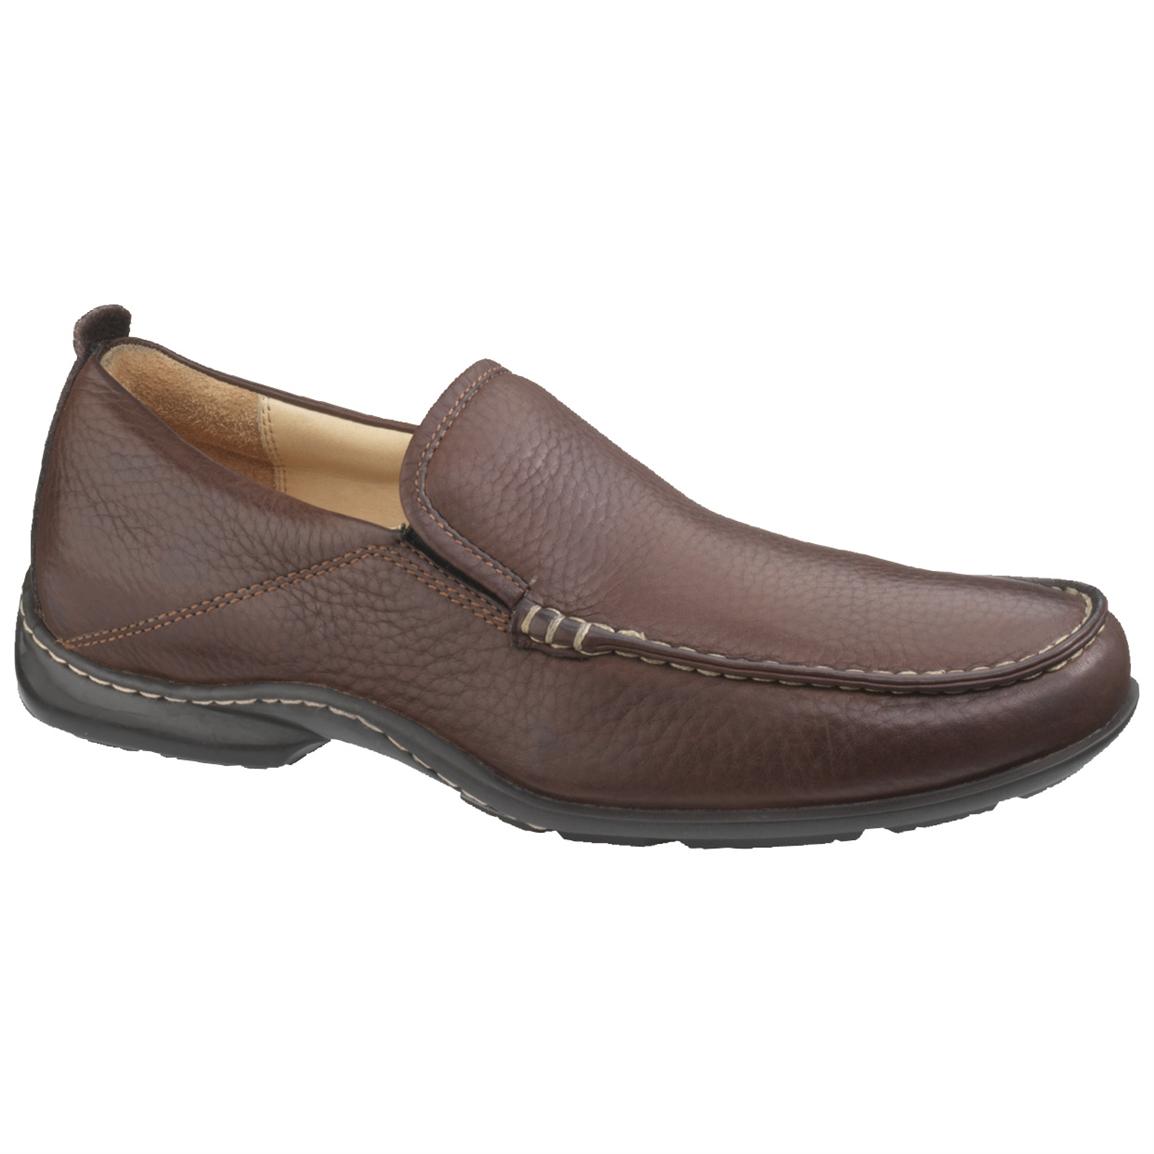 Men's Hush Puppies® GT Shoes - 283721, Casual Shoes at Sportsman's Guide